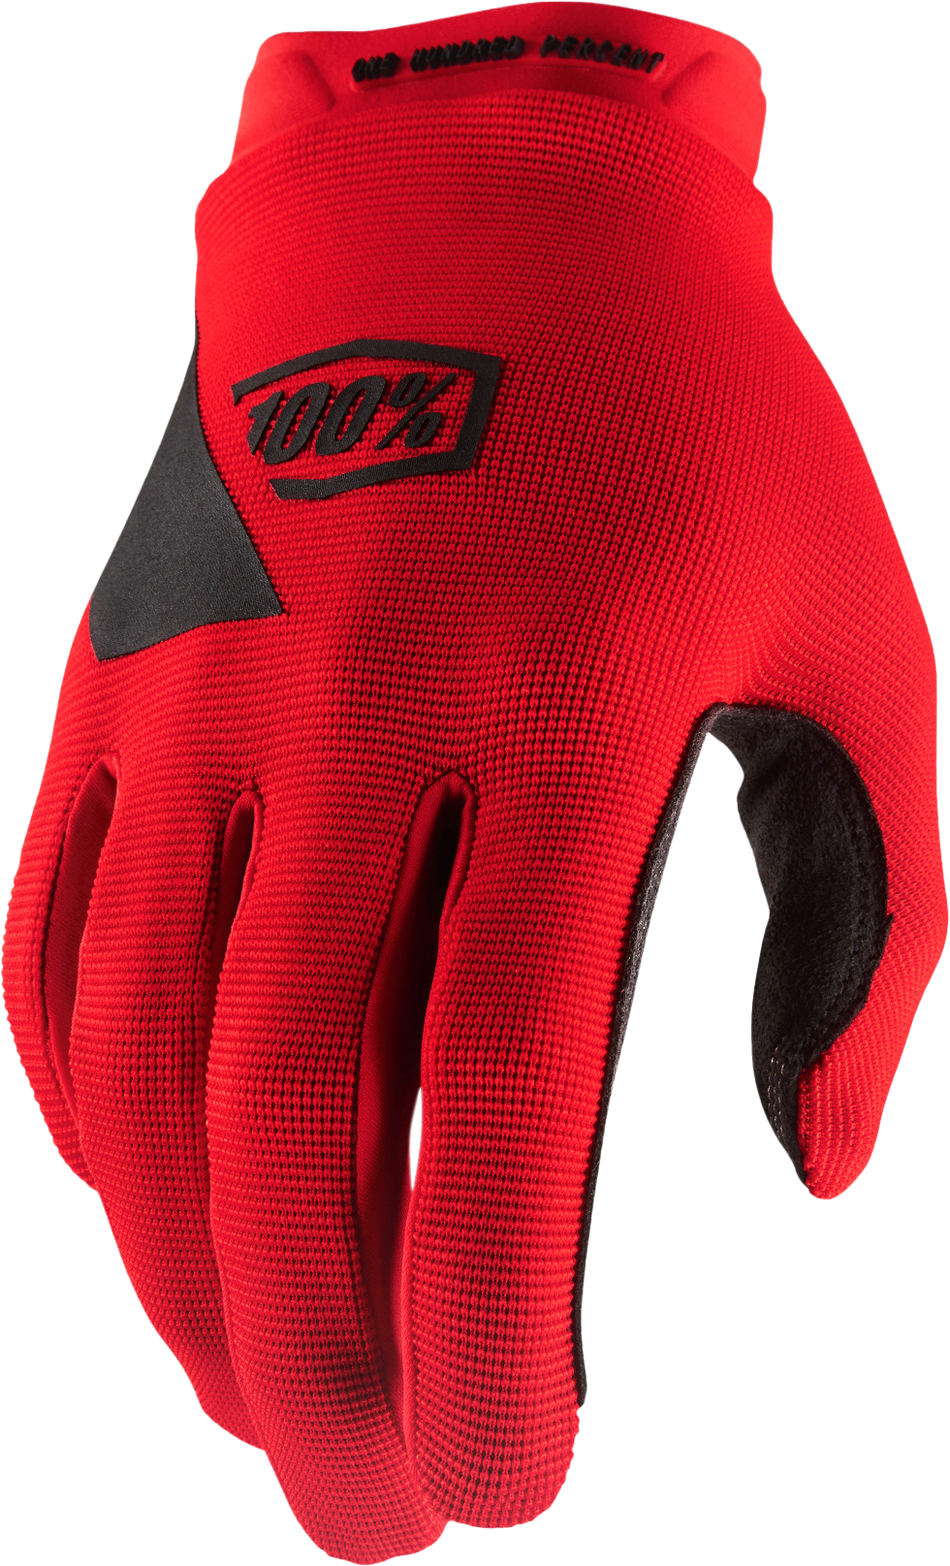 100% Ridecamp Gloves Red Xl 10011-00023